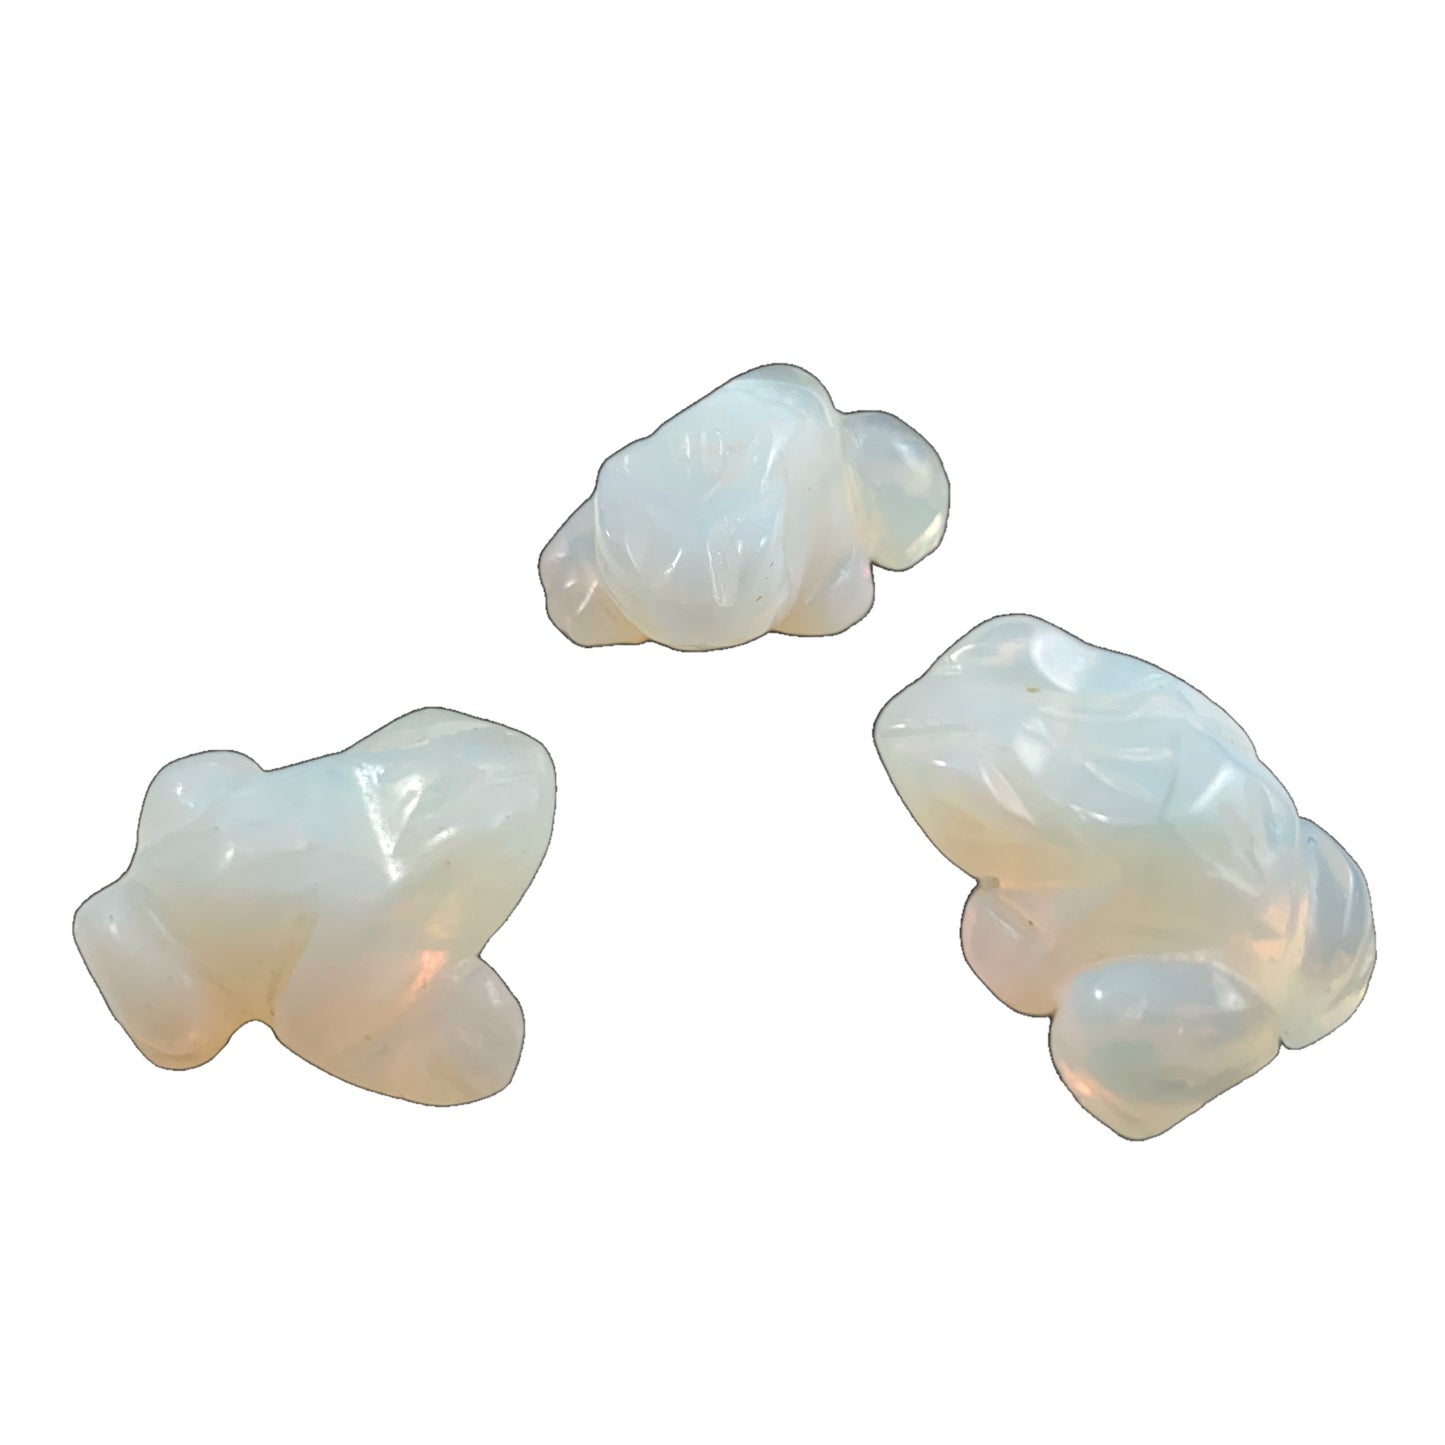 Baby Frog - 25x28mm 1 inch - Opalite - Price Each - NEW922